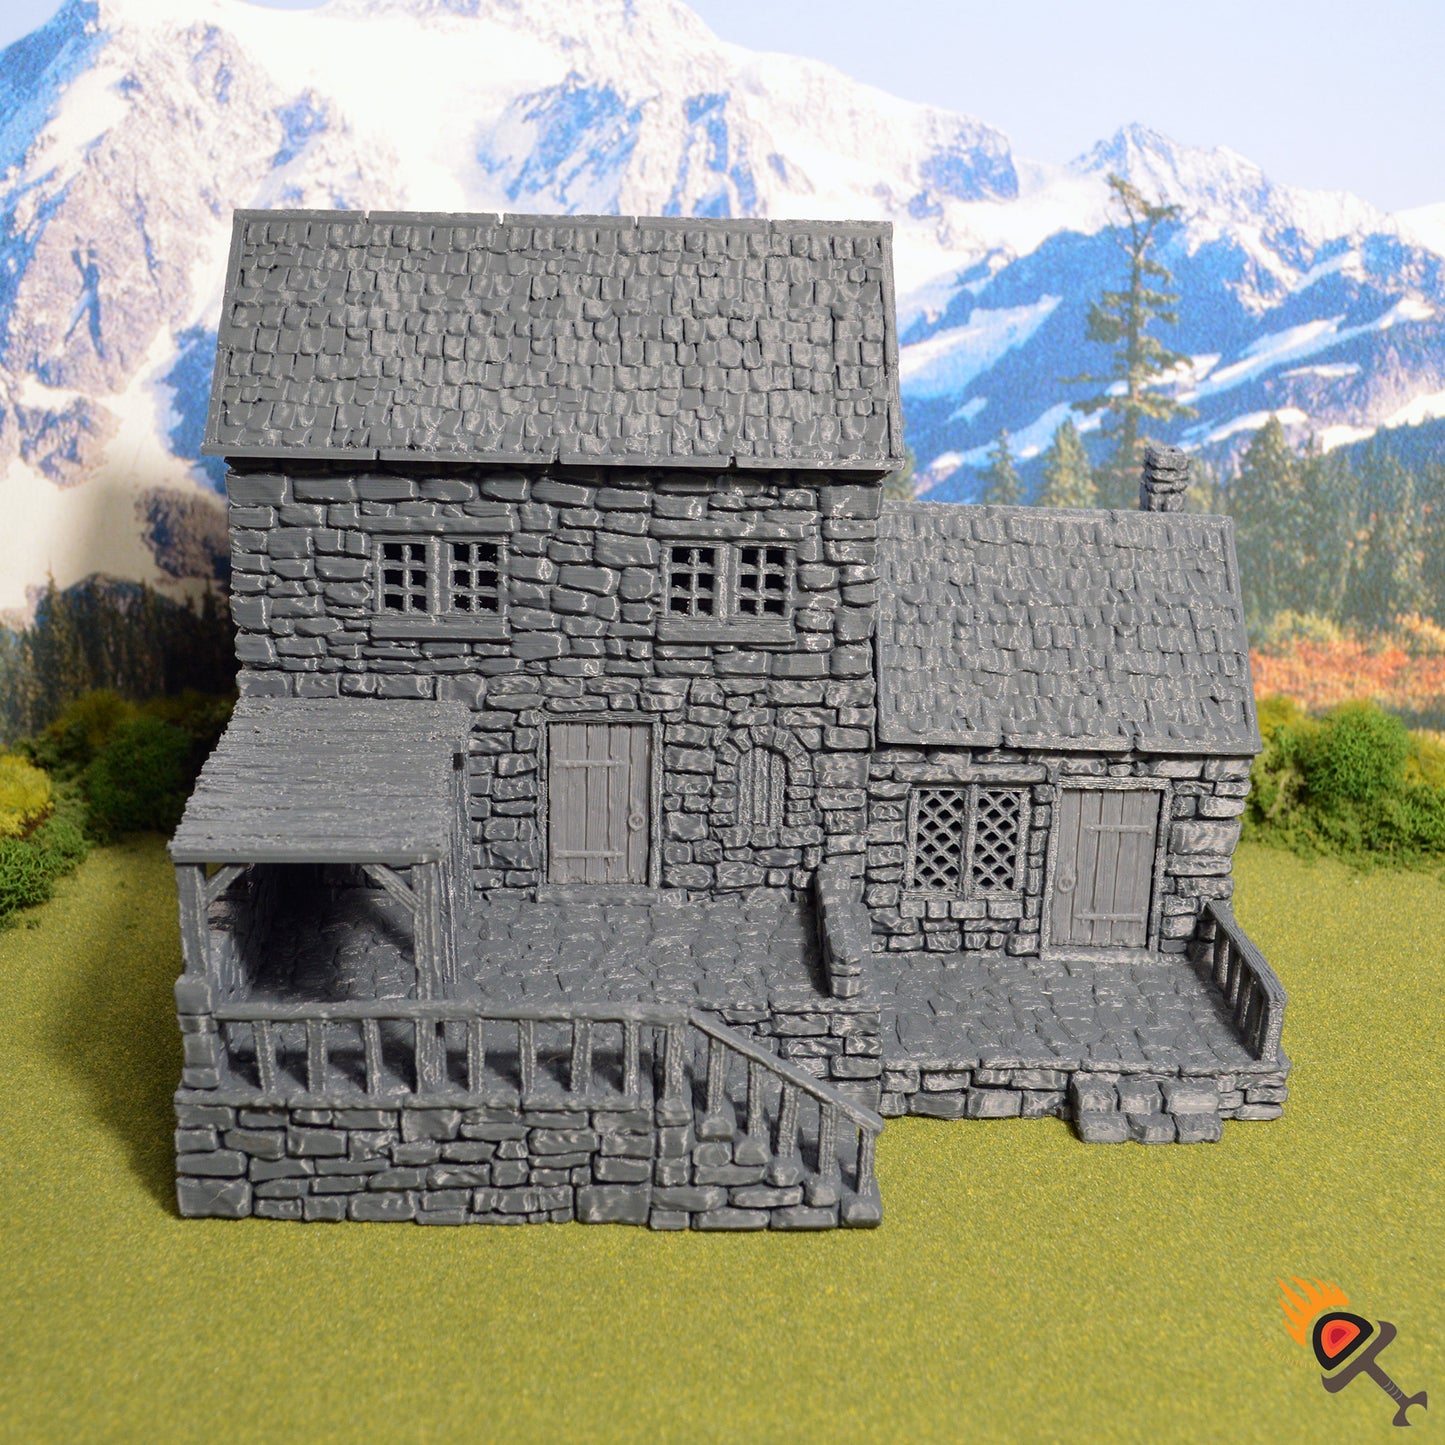 Stonestreet Bakers 15mm 28mm 32mm for D&D Terrain, DnD Pathfinder Medieval Village, Printable Scenery King and Country